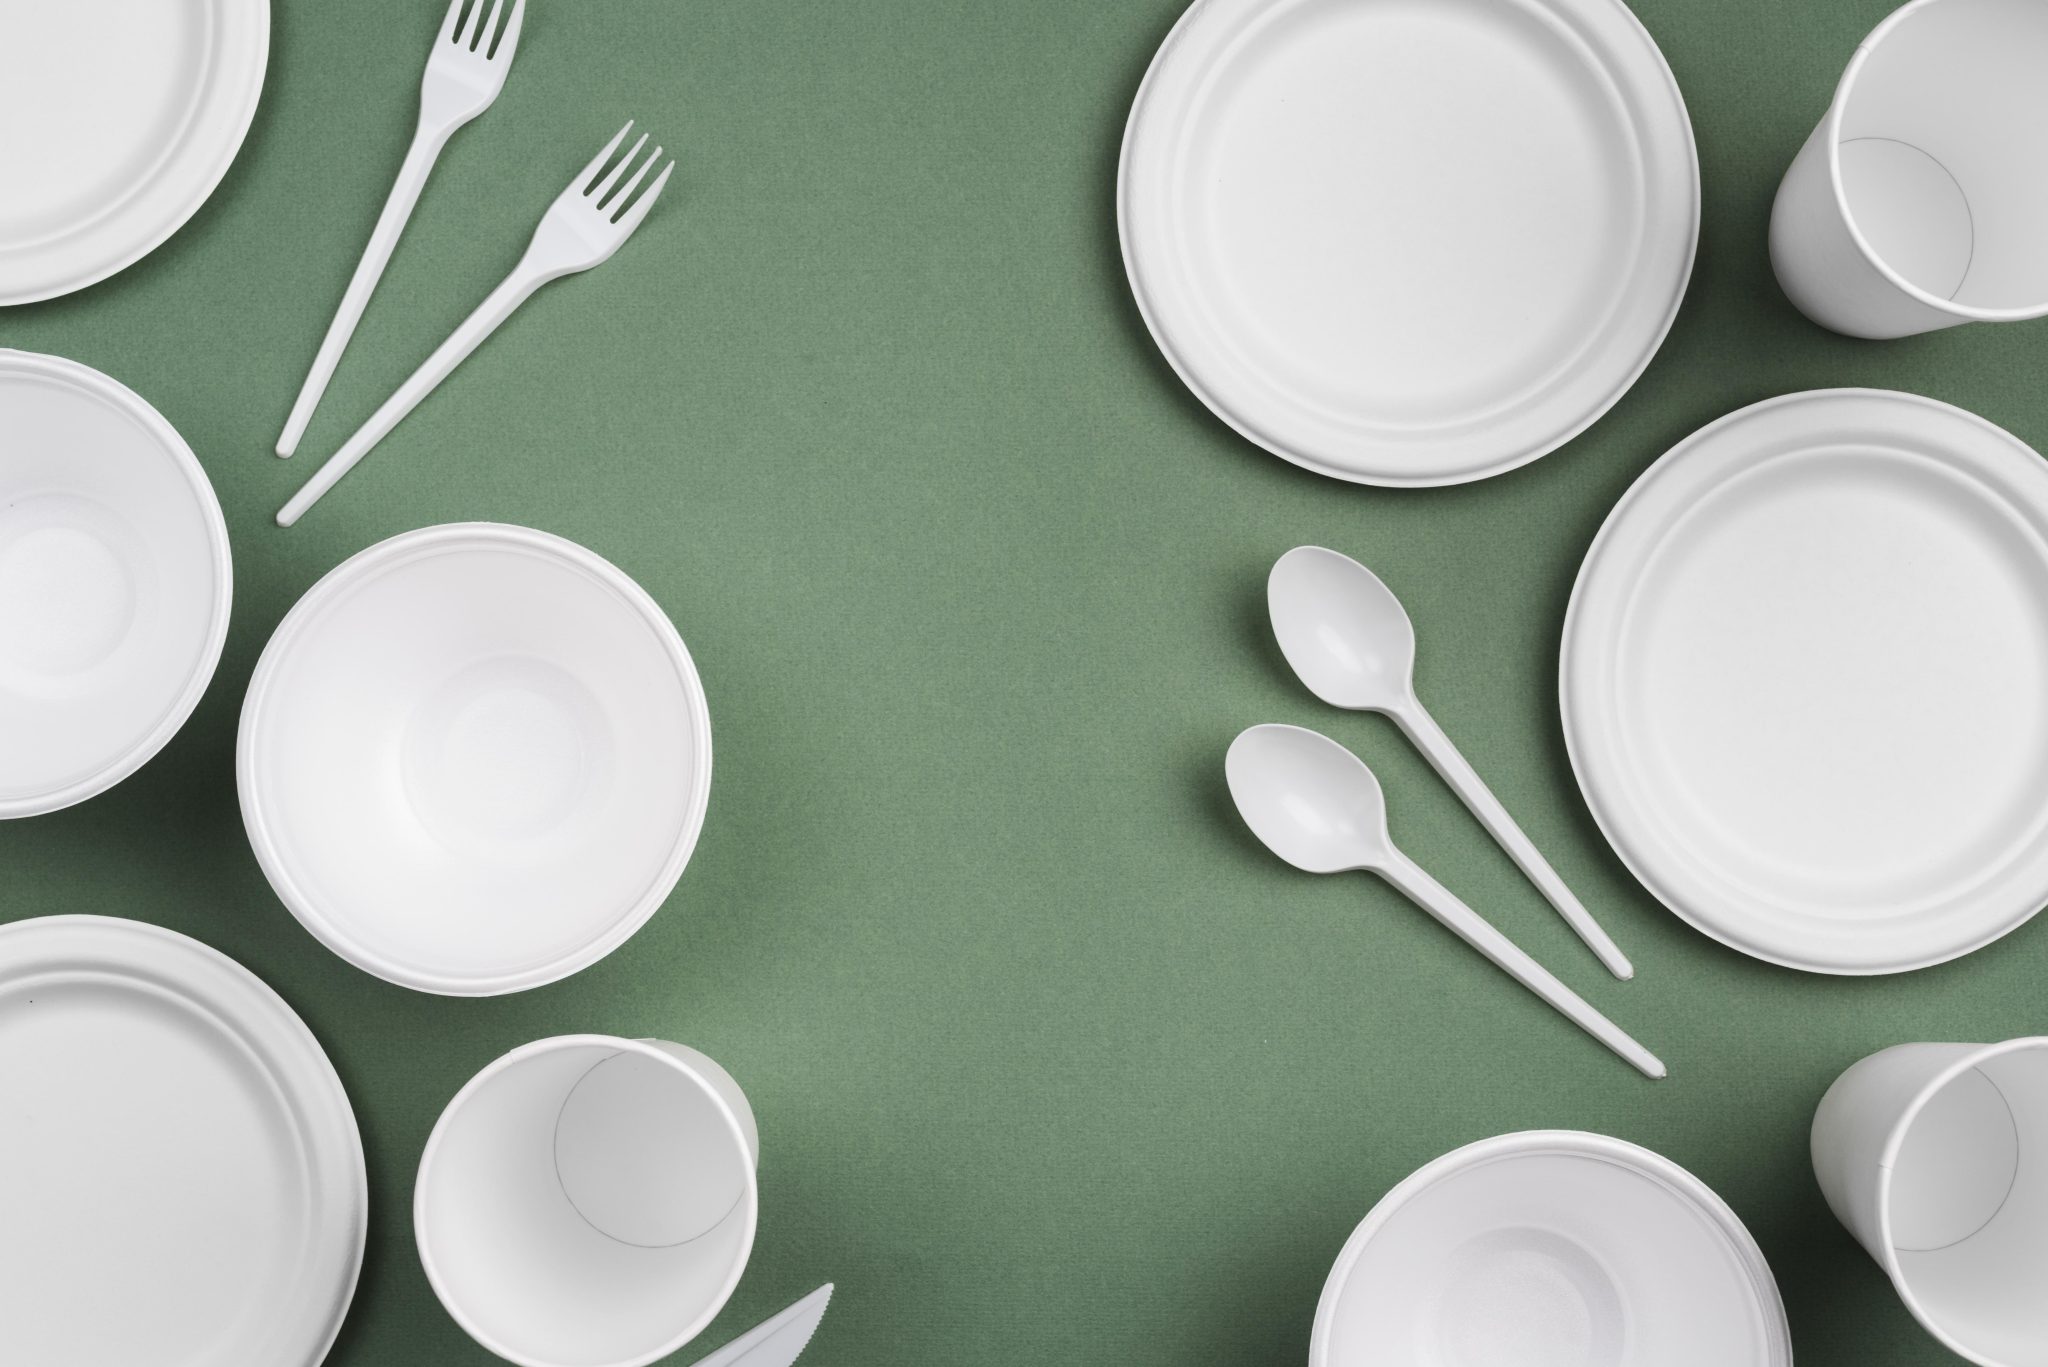 A Manual for Making Disposable Plates and Dishes